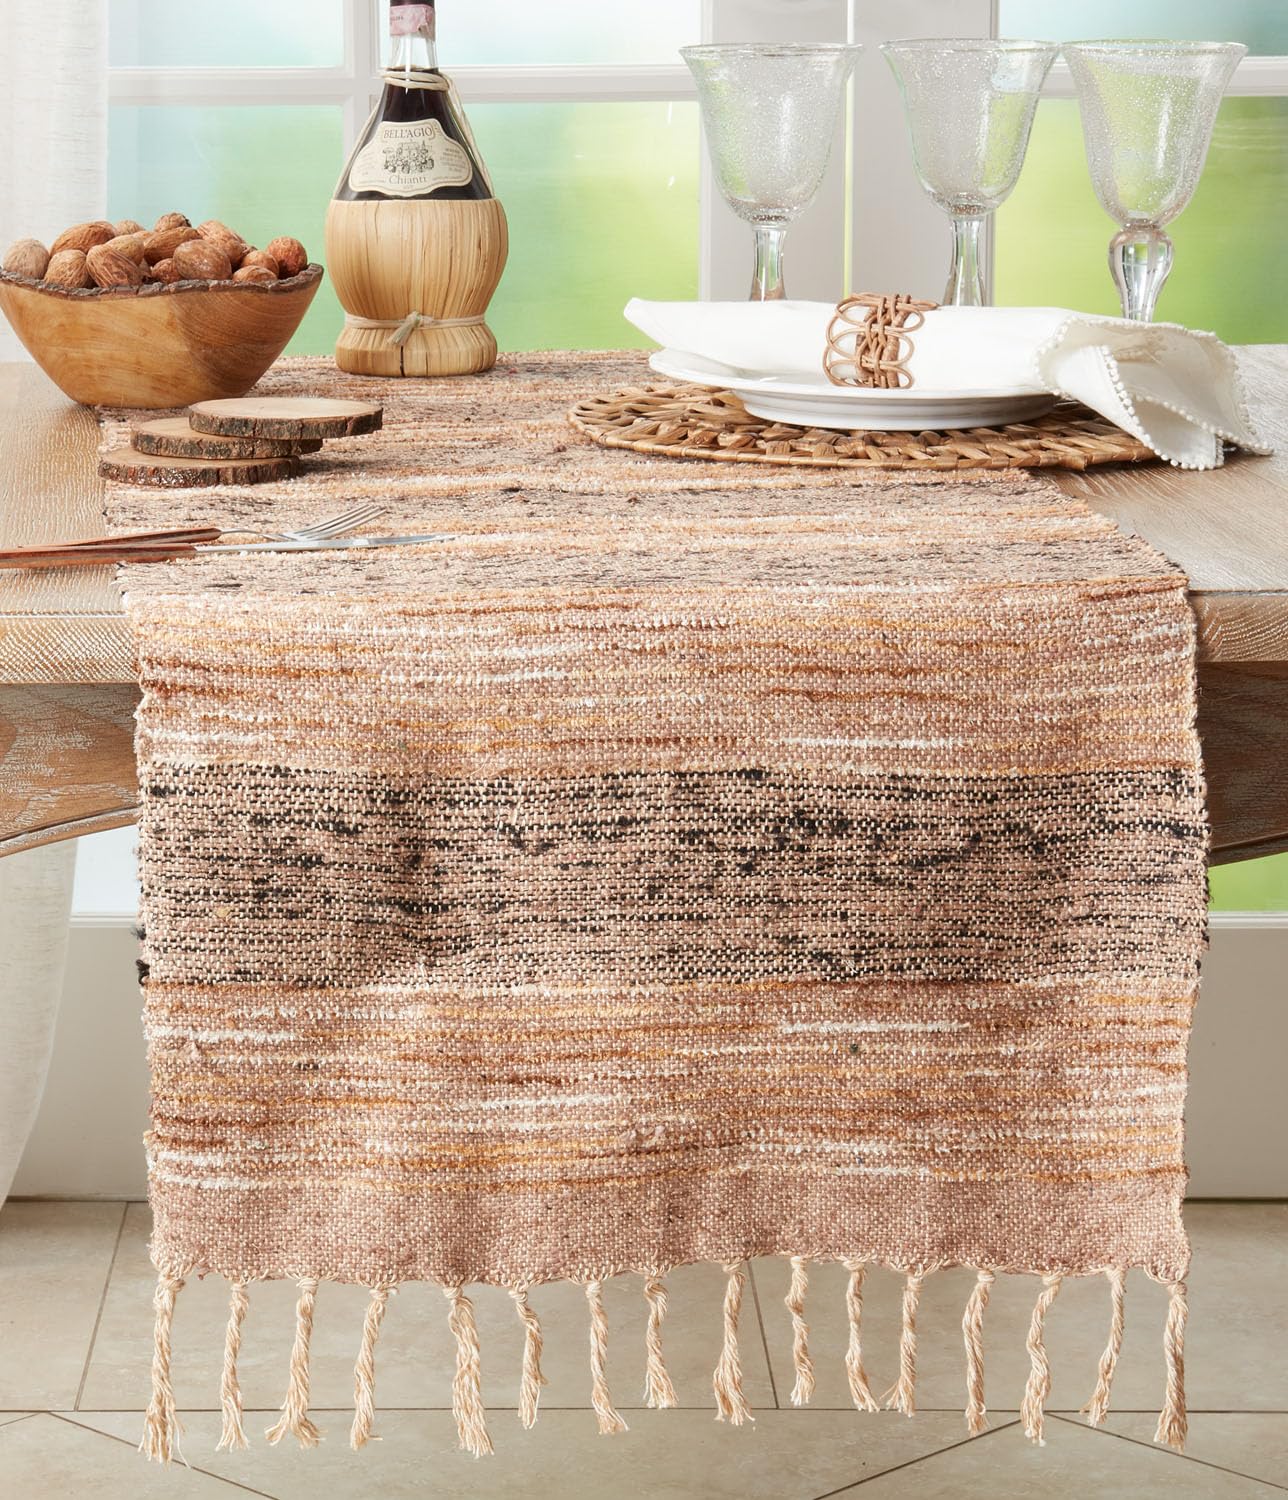 Fennco Styles Woven Striped Fringe Table Runner 16" W x 72" L - Brown Cotton Table Cover for Home Décor, Dining Table, Banquets, Family Gathering and Special Events